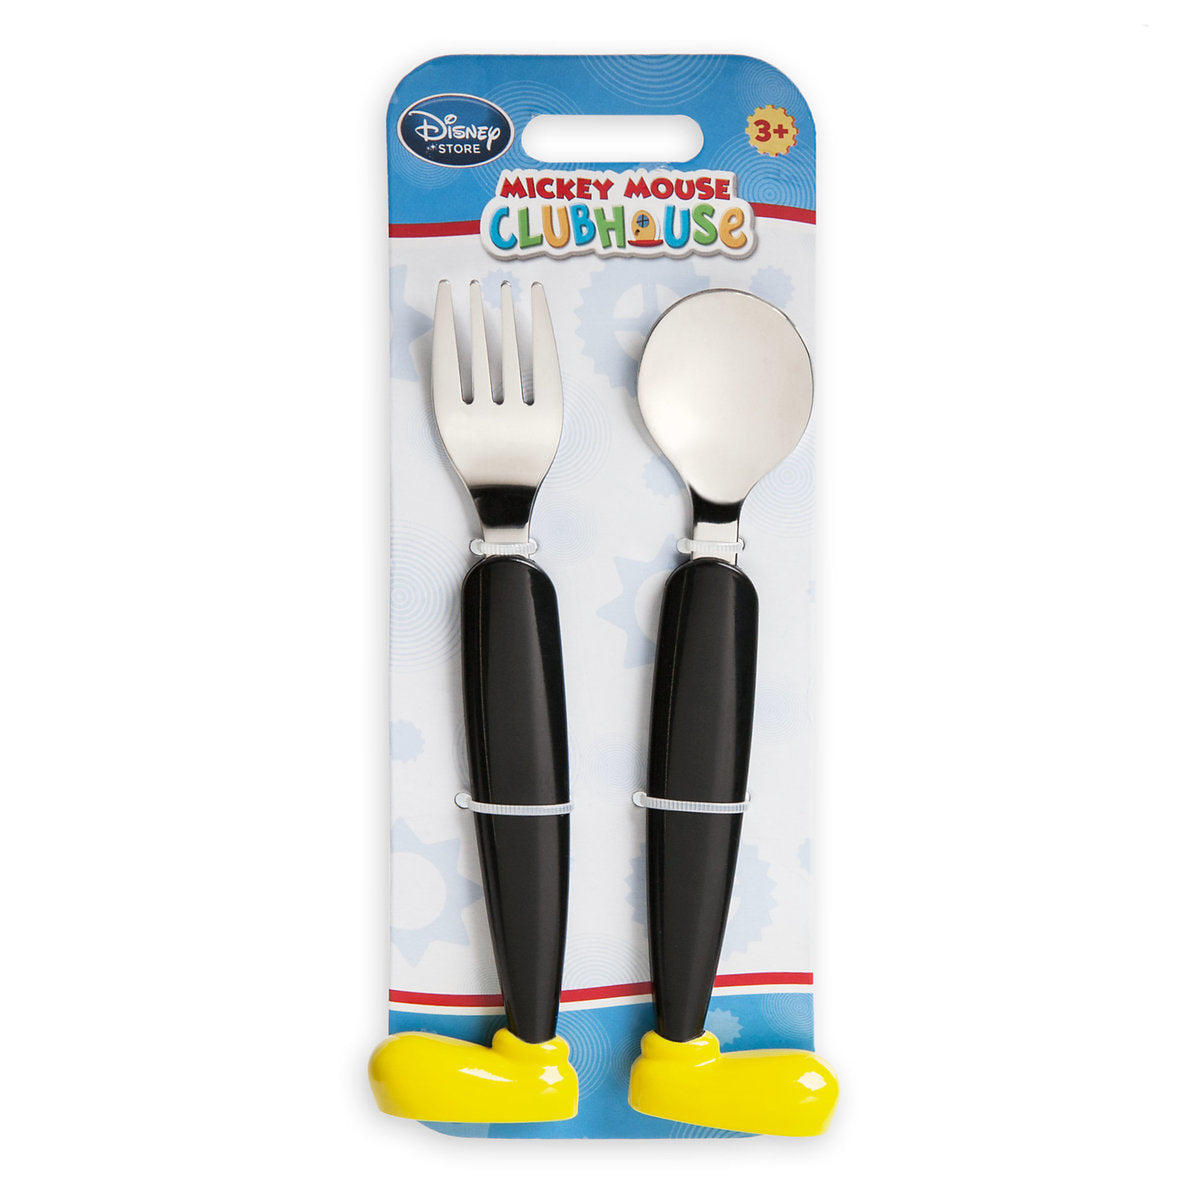 Disney Junior Mickey Mouse Clubhouse Flatware Set